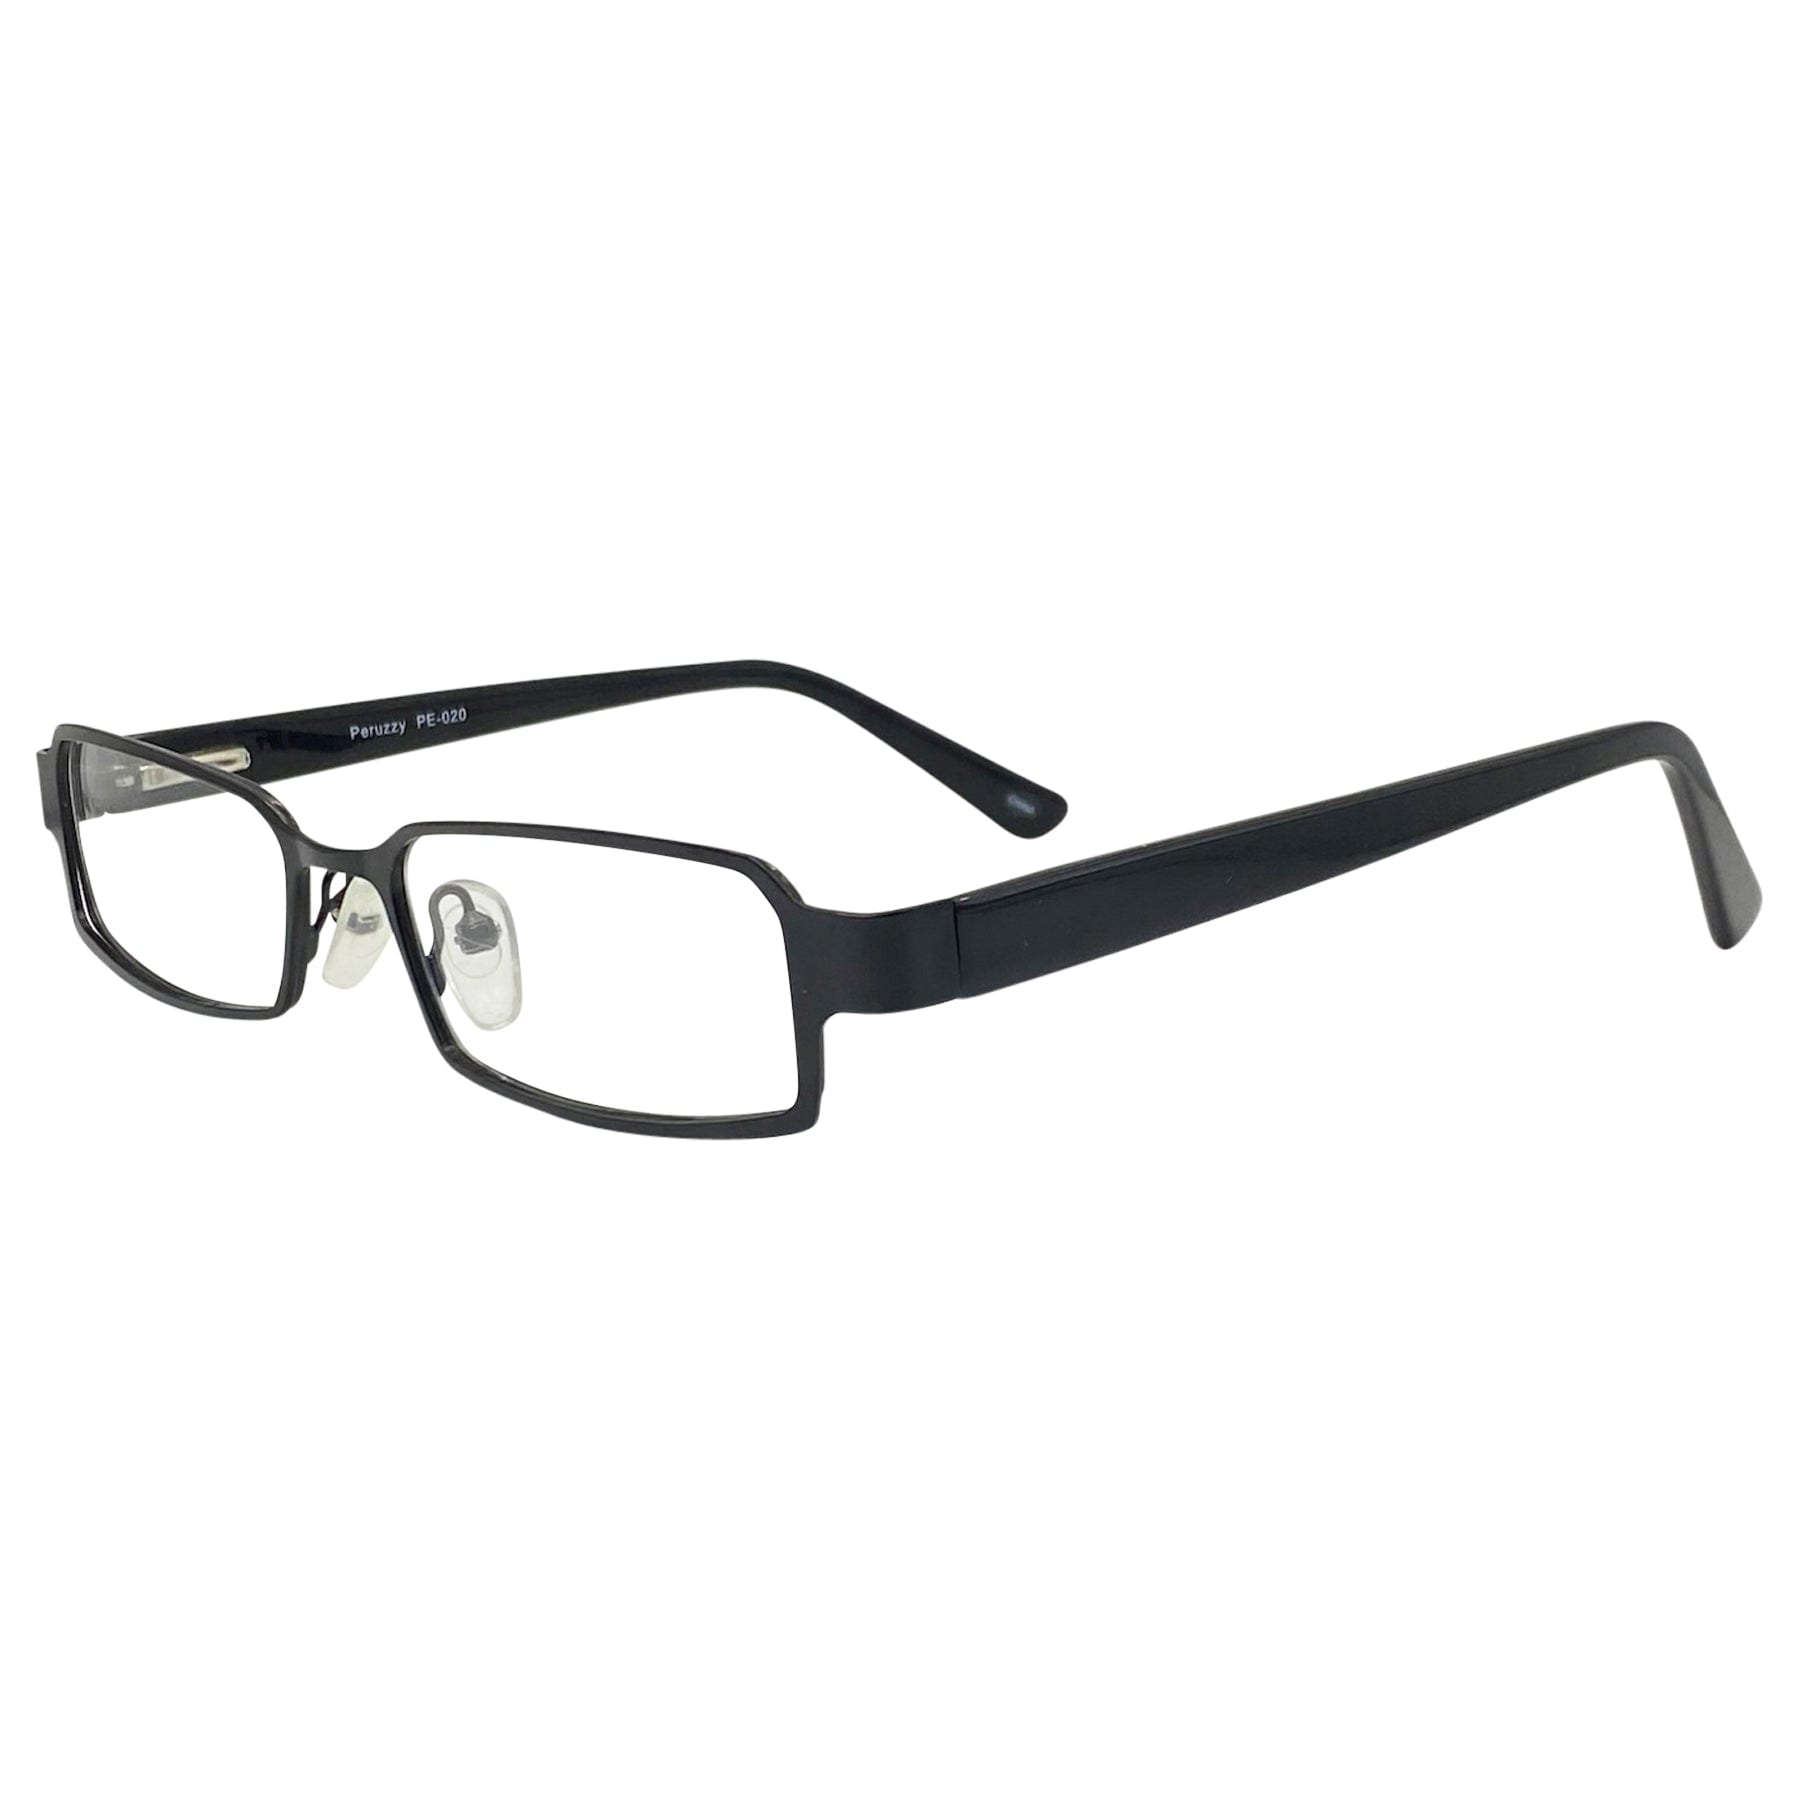 black and clear glasses with 90s style, black matte metal frame